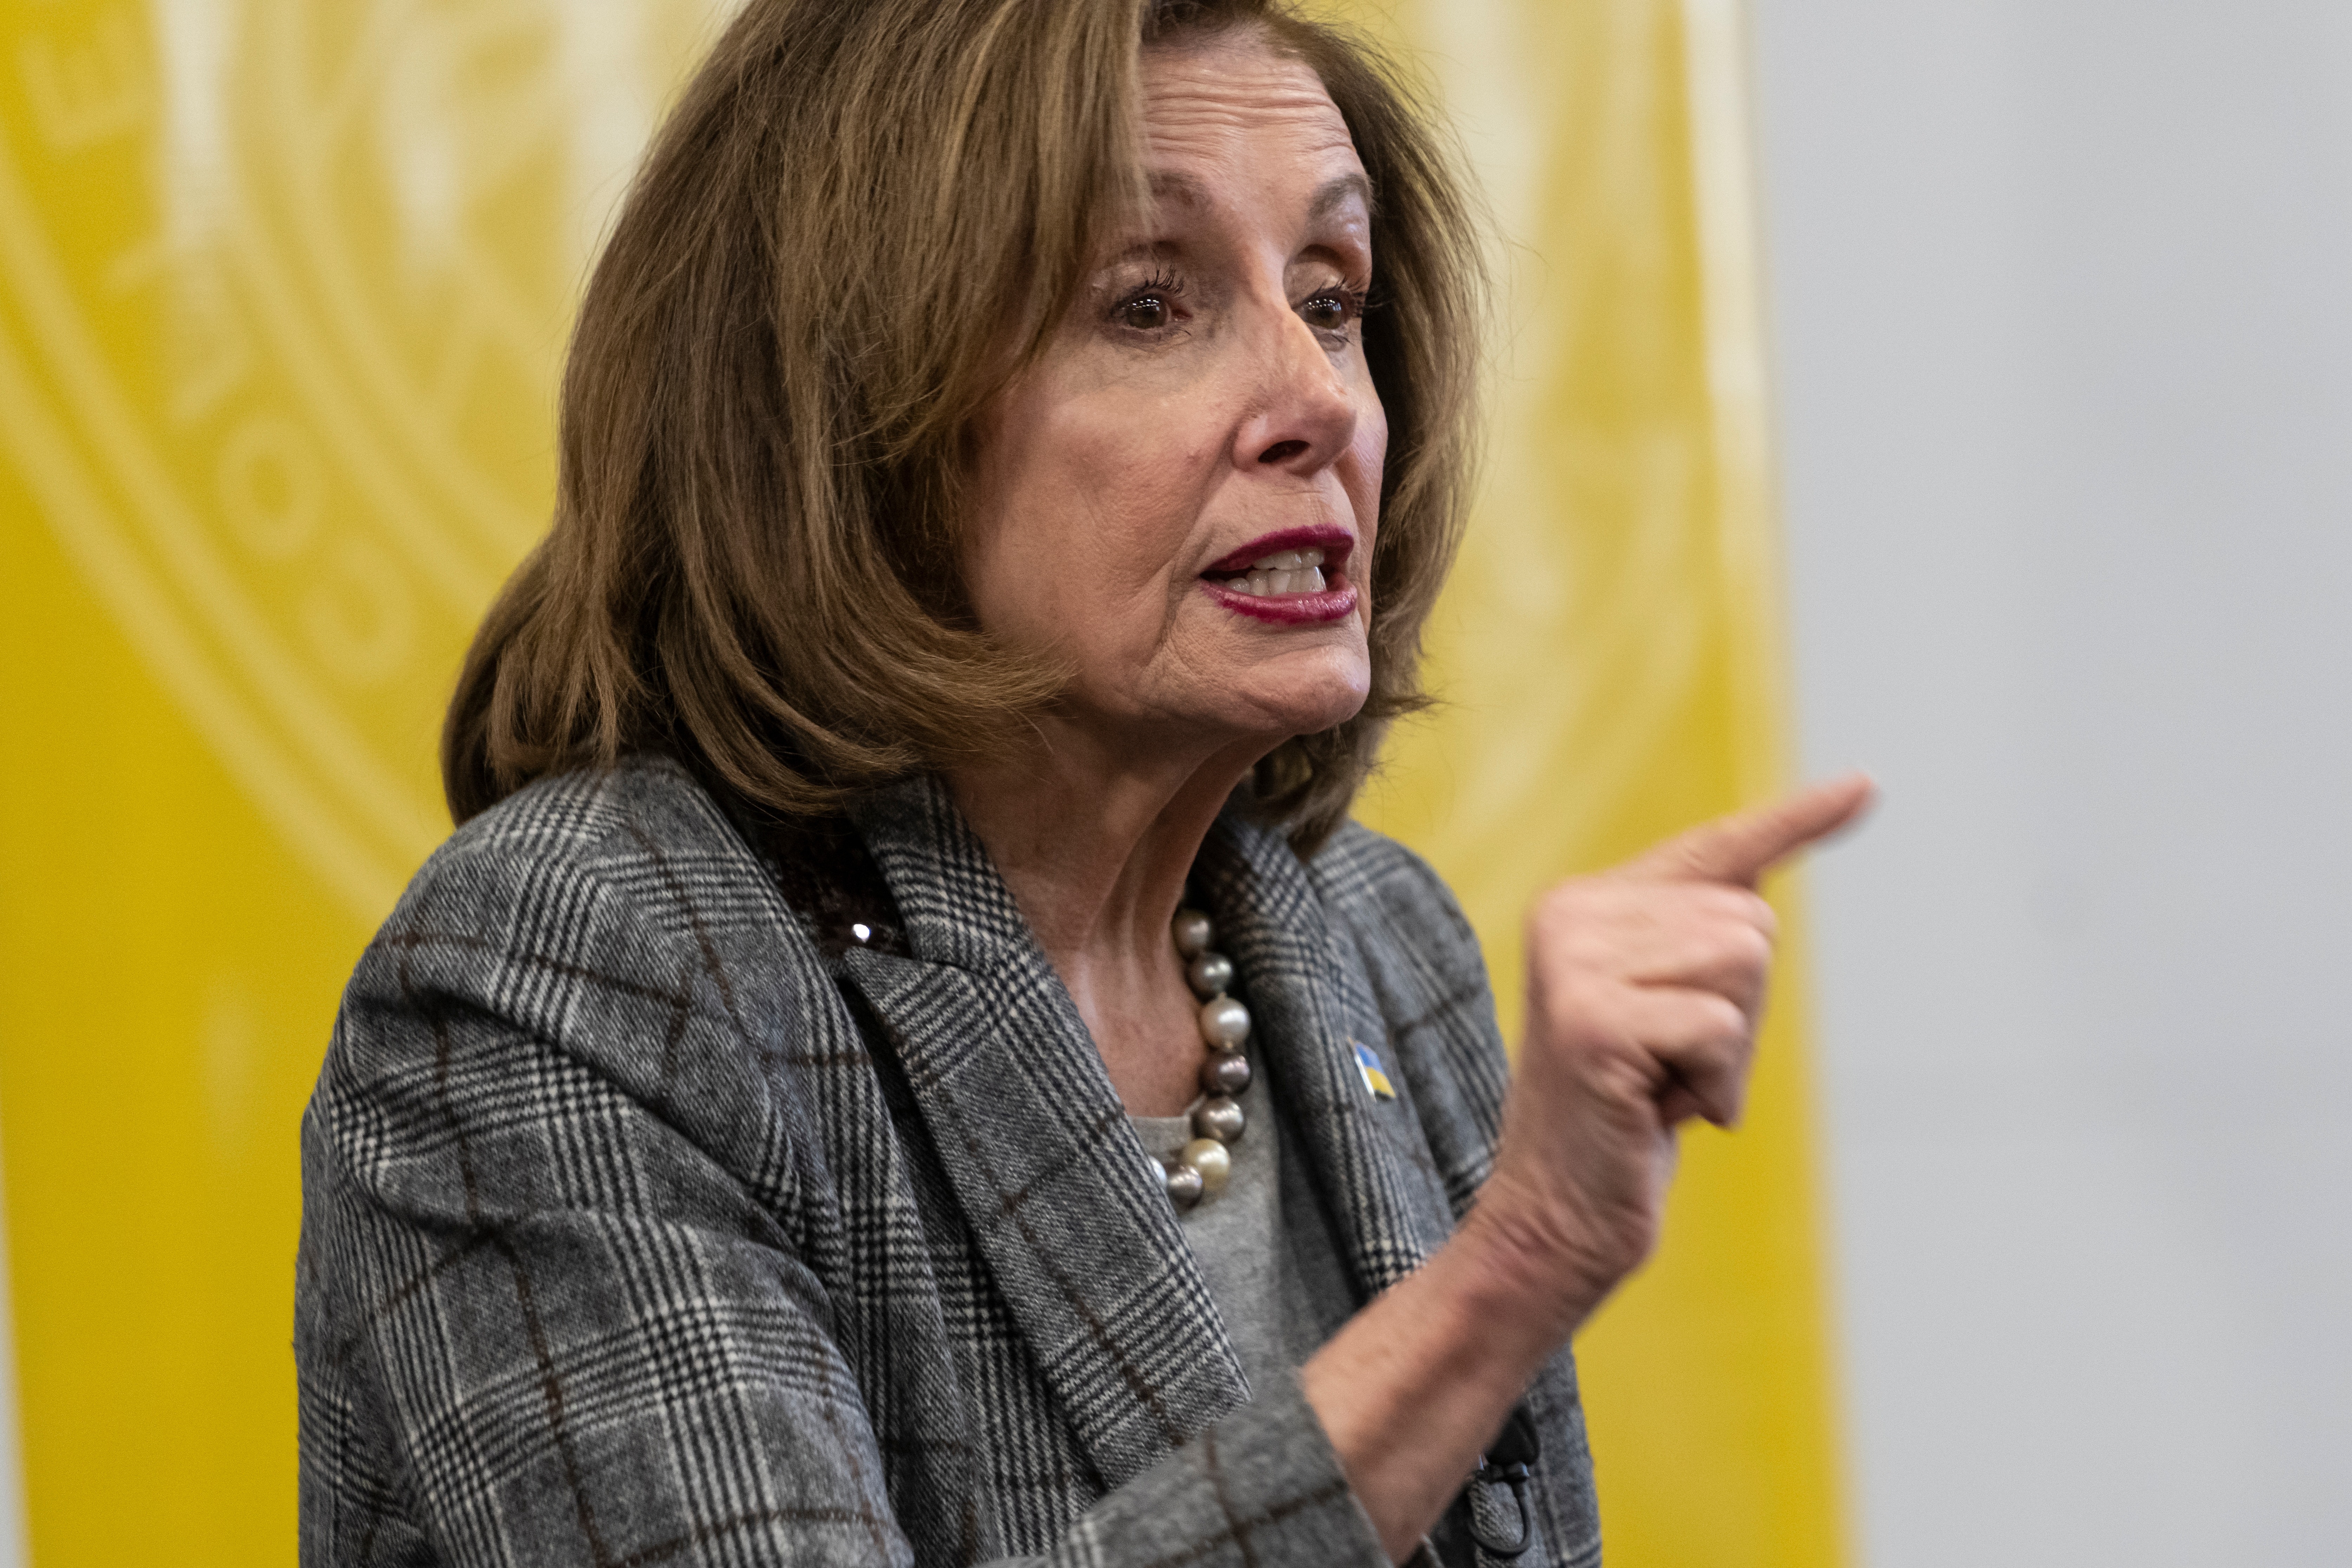 Nancy Pelosi Wanted To 'Punch Trump Out' If He Turned Up At The Capitol On Jan. 6